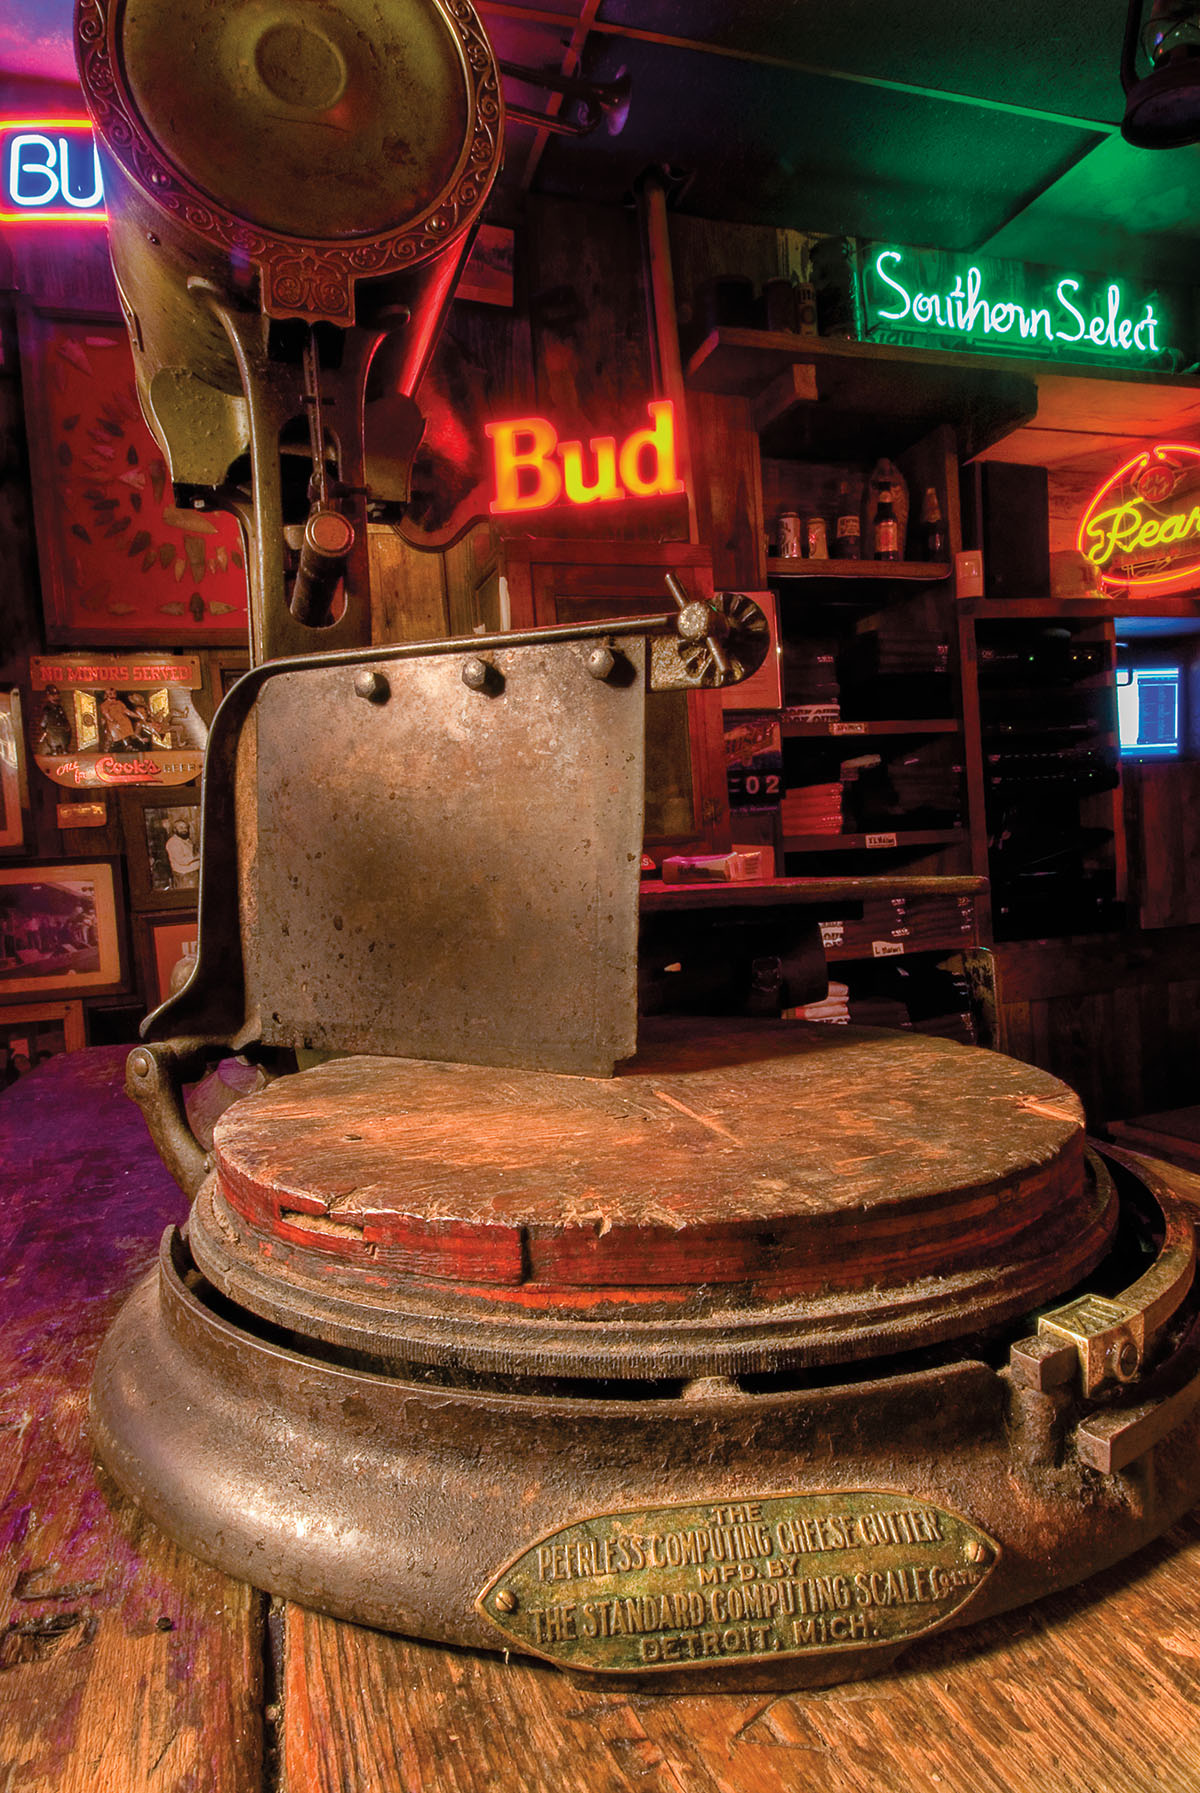 A vintage cheese cutter in front of neon signs at the Dixie Chicken bar